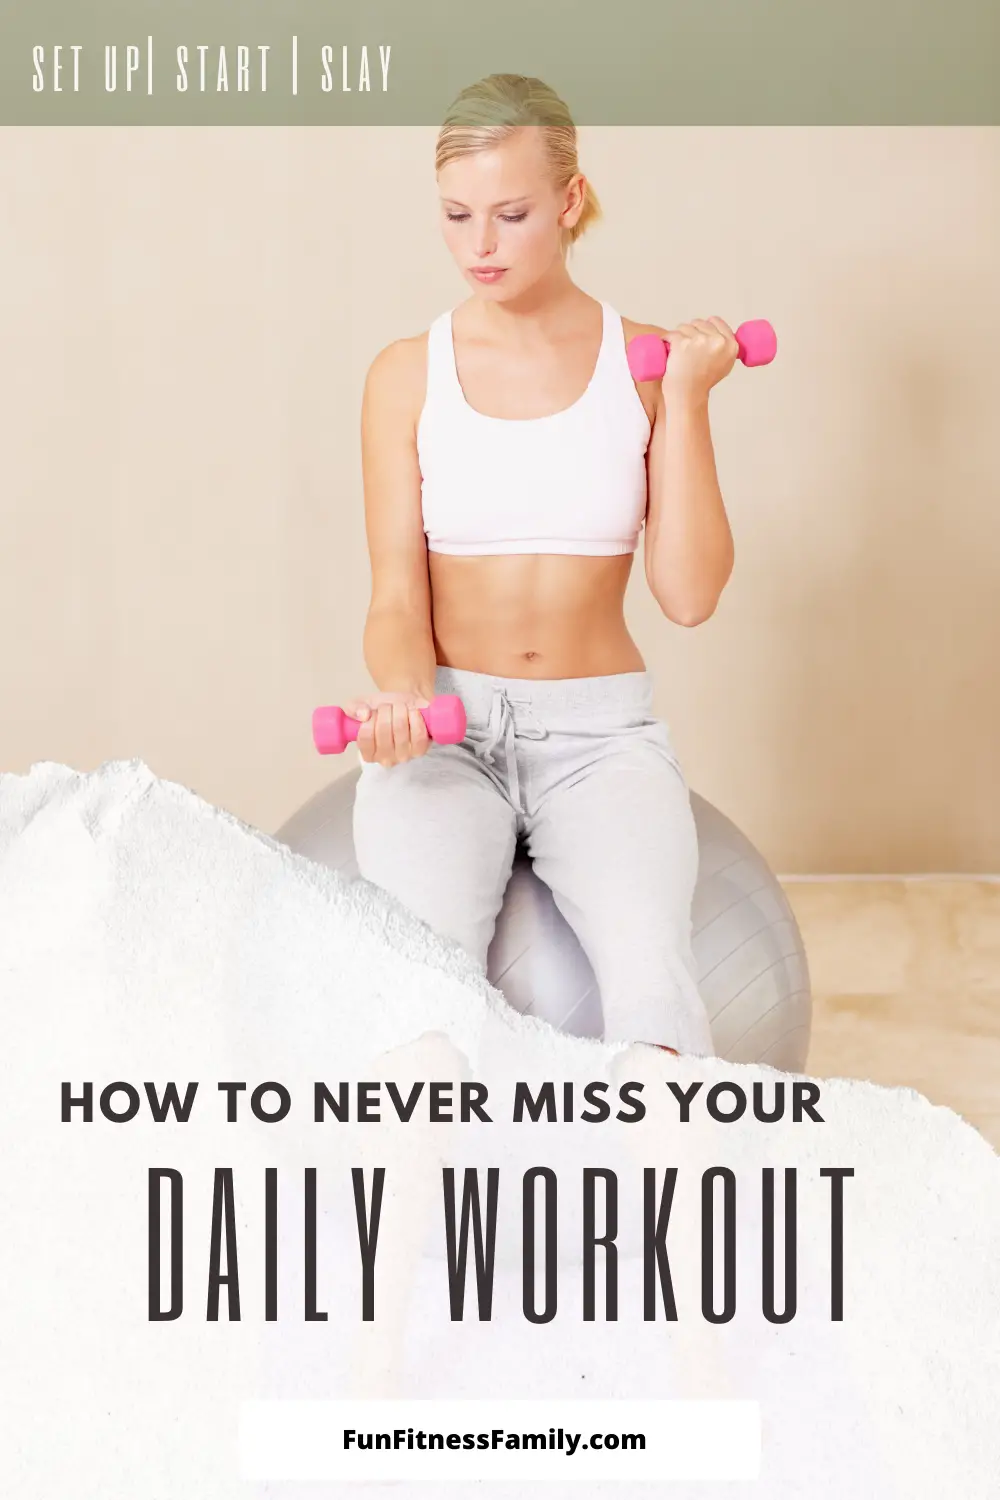 Set up, start, and slay your daily fitness routine! How to never miss a daily workout! #fitness #weightloss #wellness